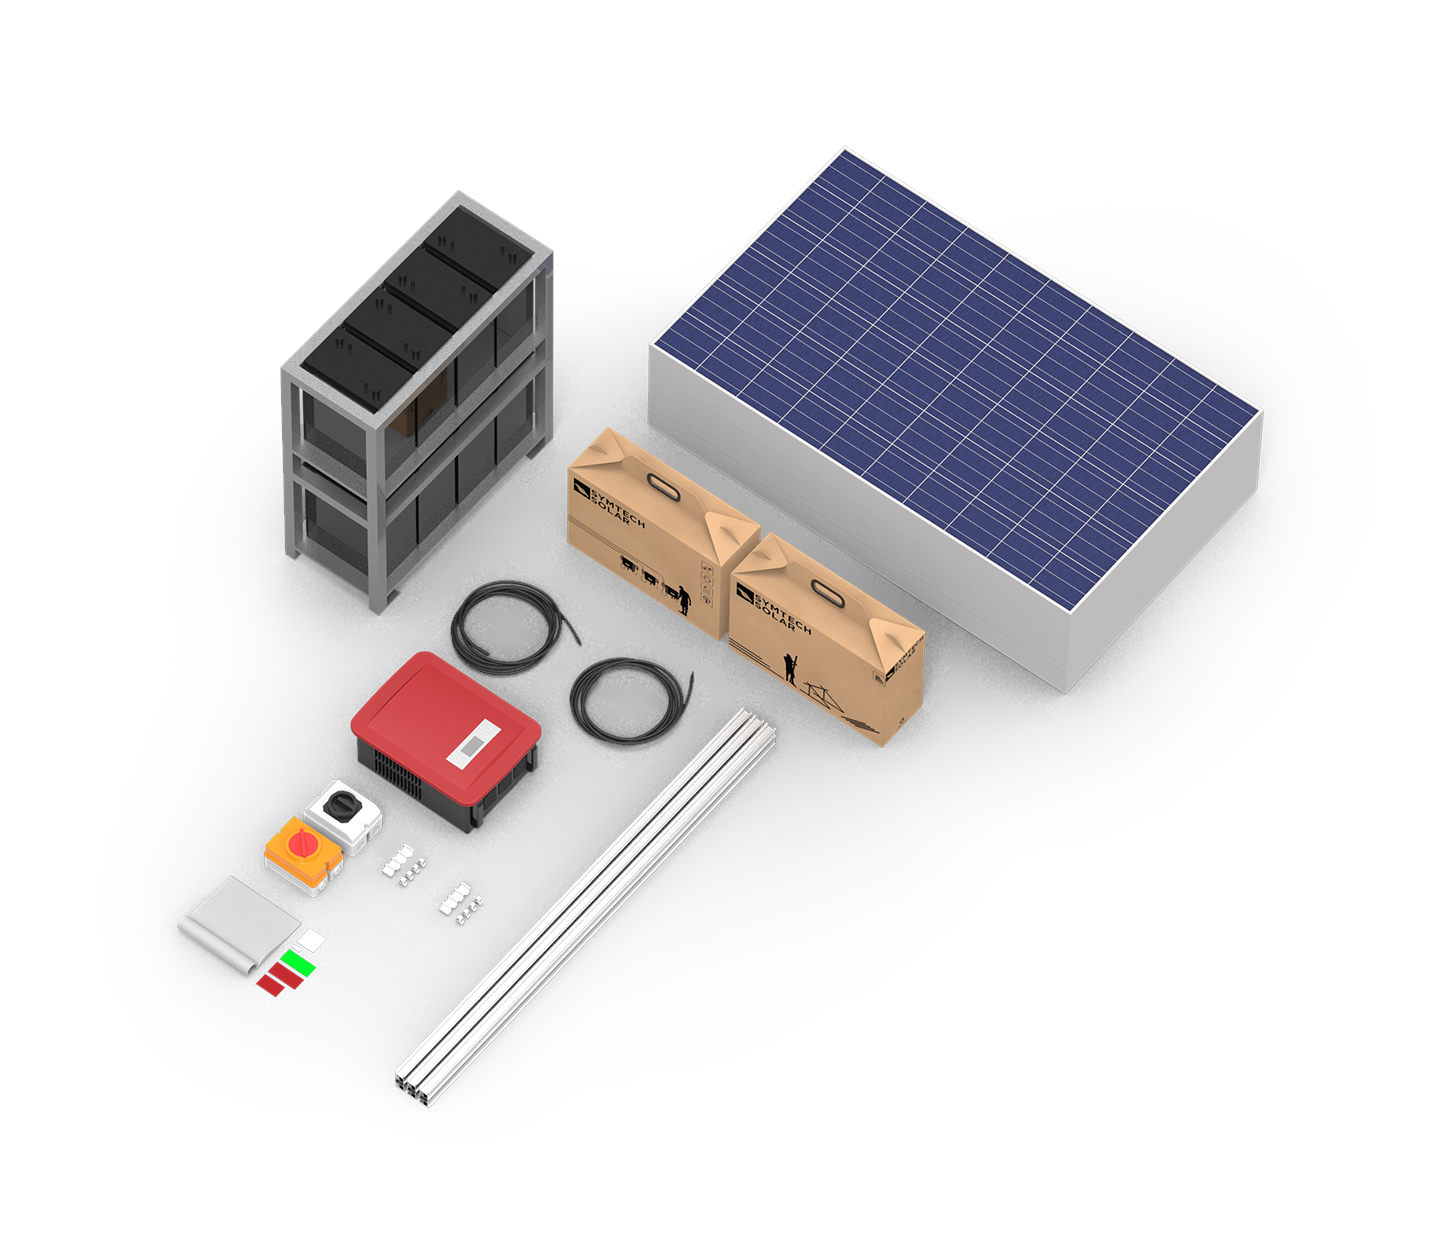 Complete Off Grid Solar Battery Kits Symtech Solar La solar group specializes in solar electricity systems for homes, schools, businesses and community buildings. complete off grid solar battery kits